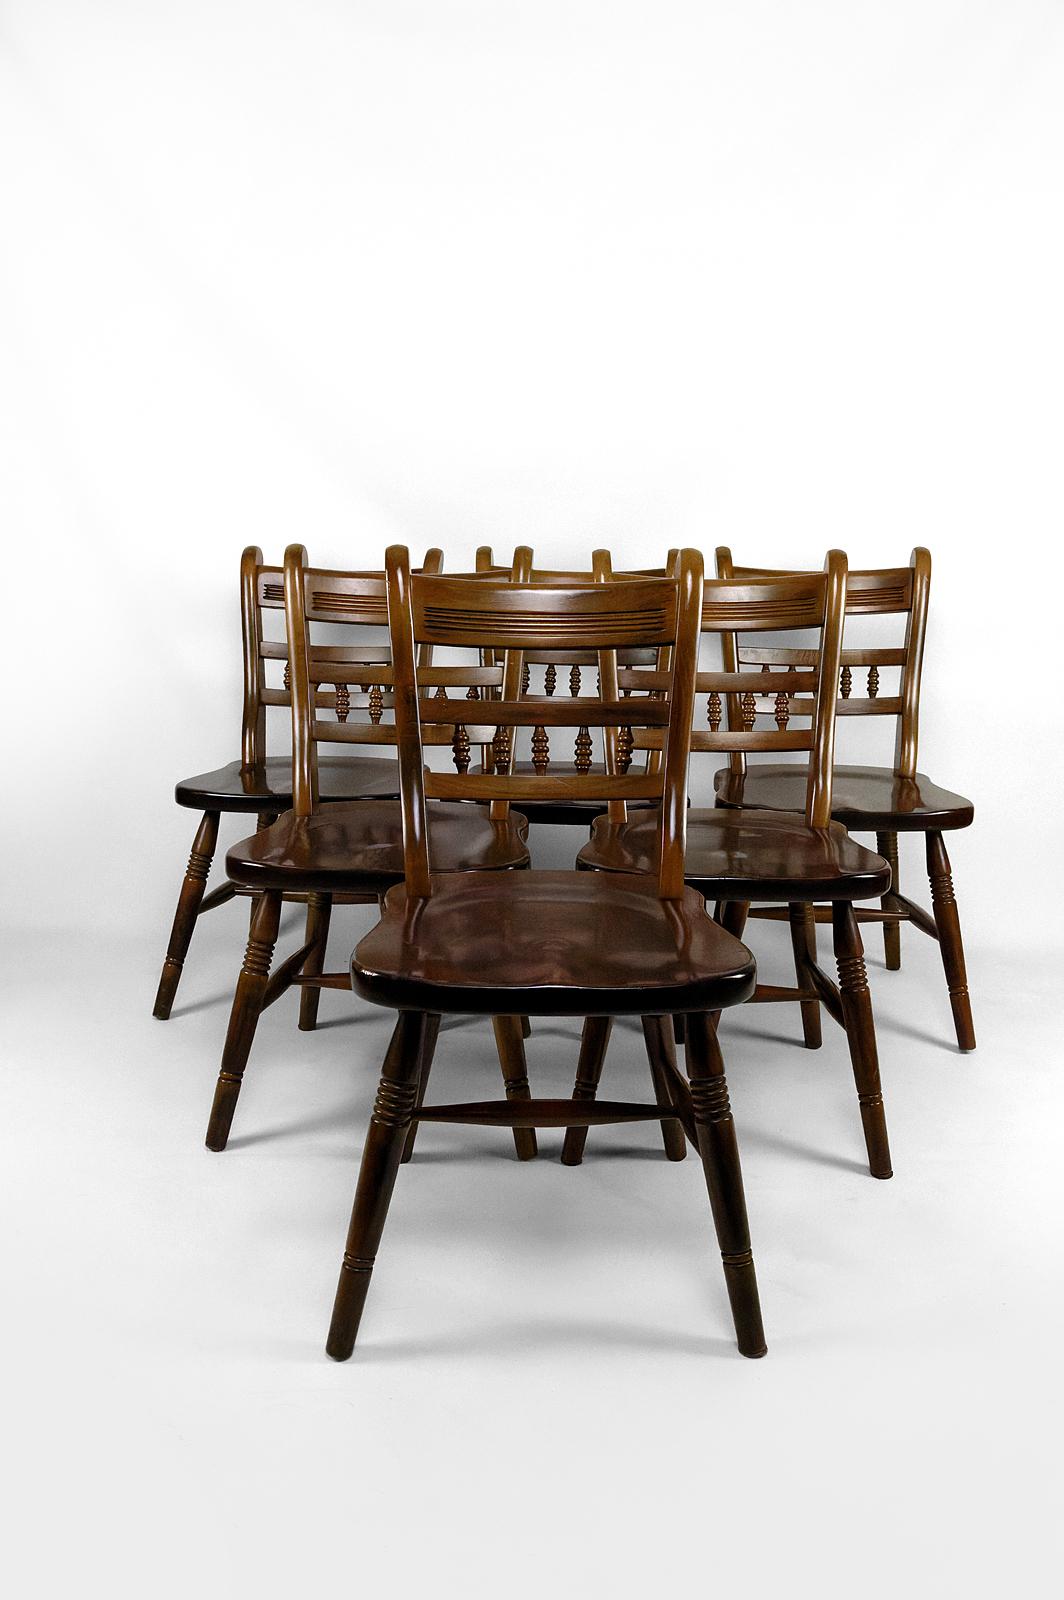 Set of 6 Windsor / tavern / western / bistro / saloon / cowboy chairs in beech wood.

Good condition, heavy and solid, small traces of wear.
Circa 1970.

Dimensions:
Height:91cm
Seat height: 46cm
Width:51cm
Depth:56cm